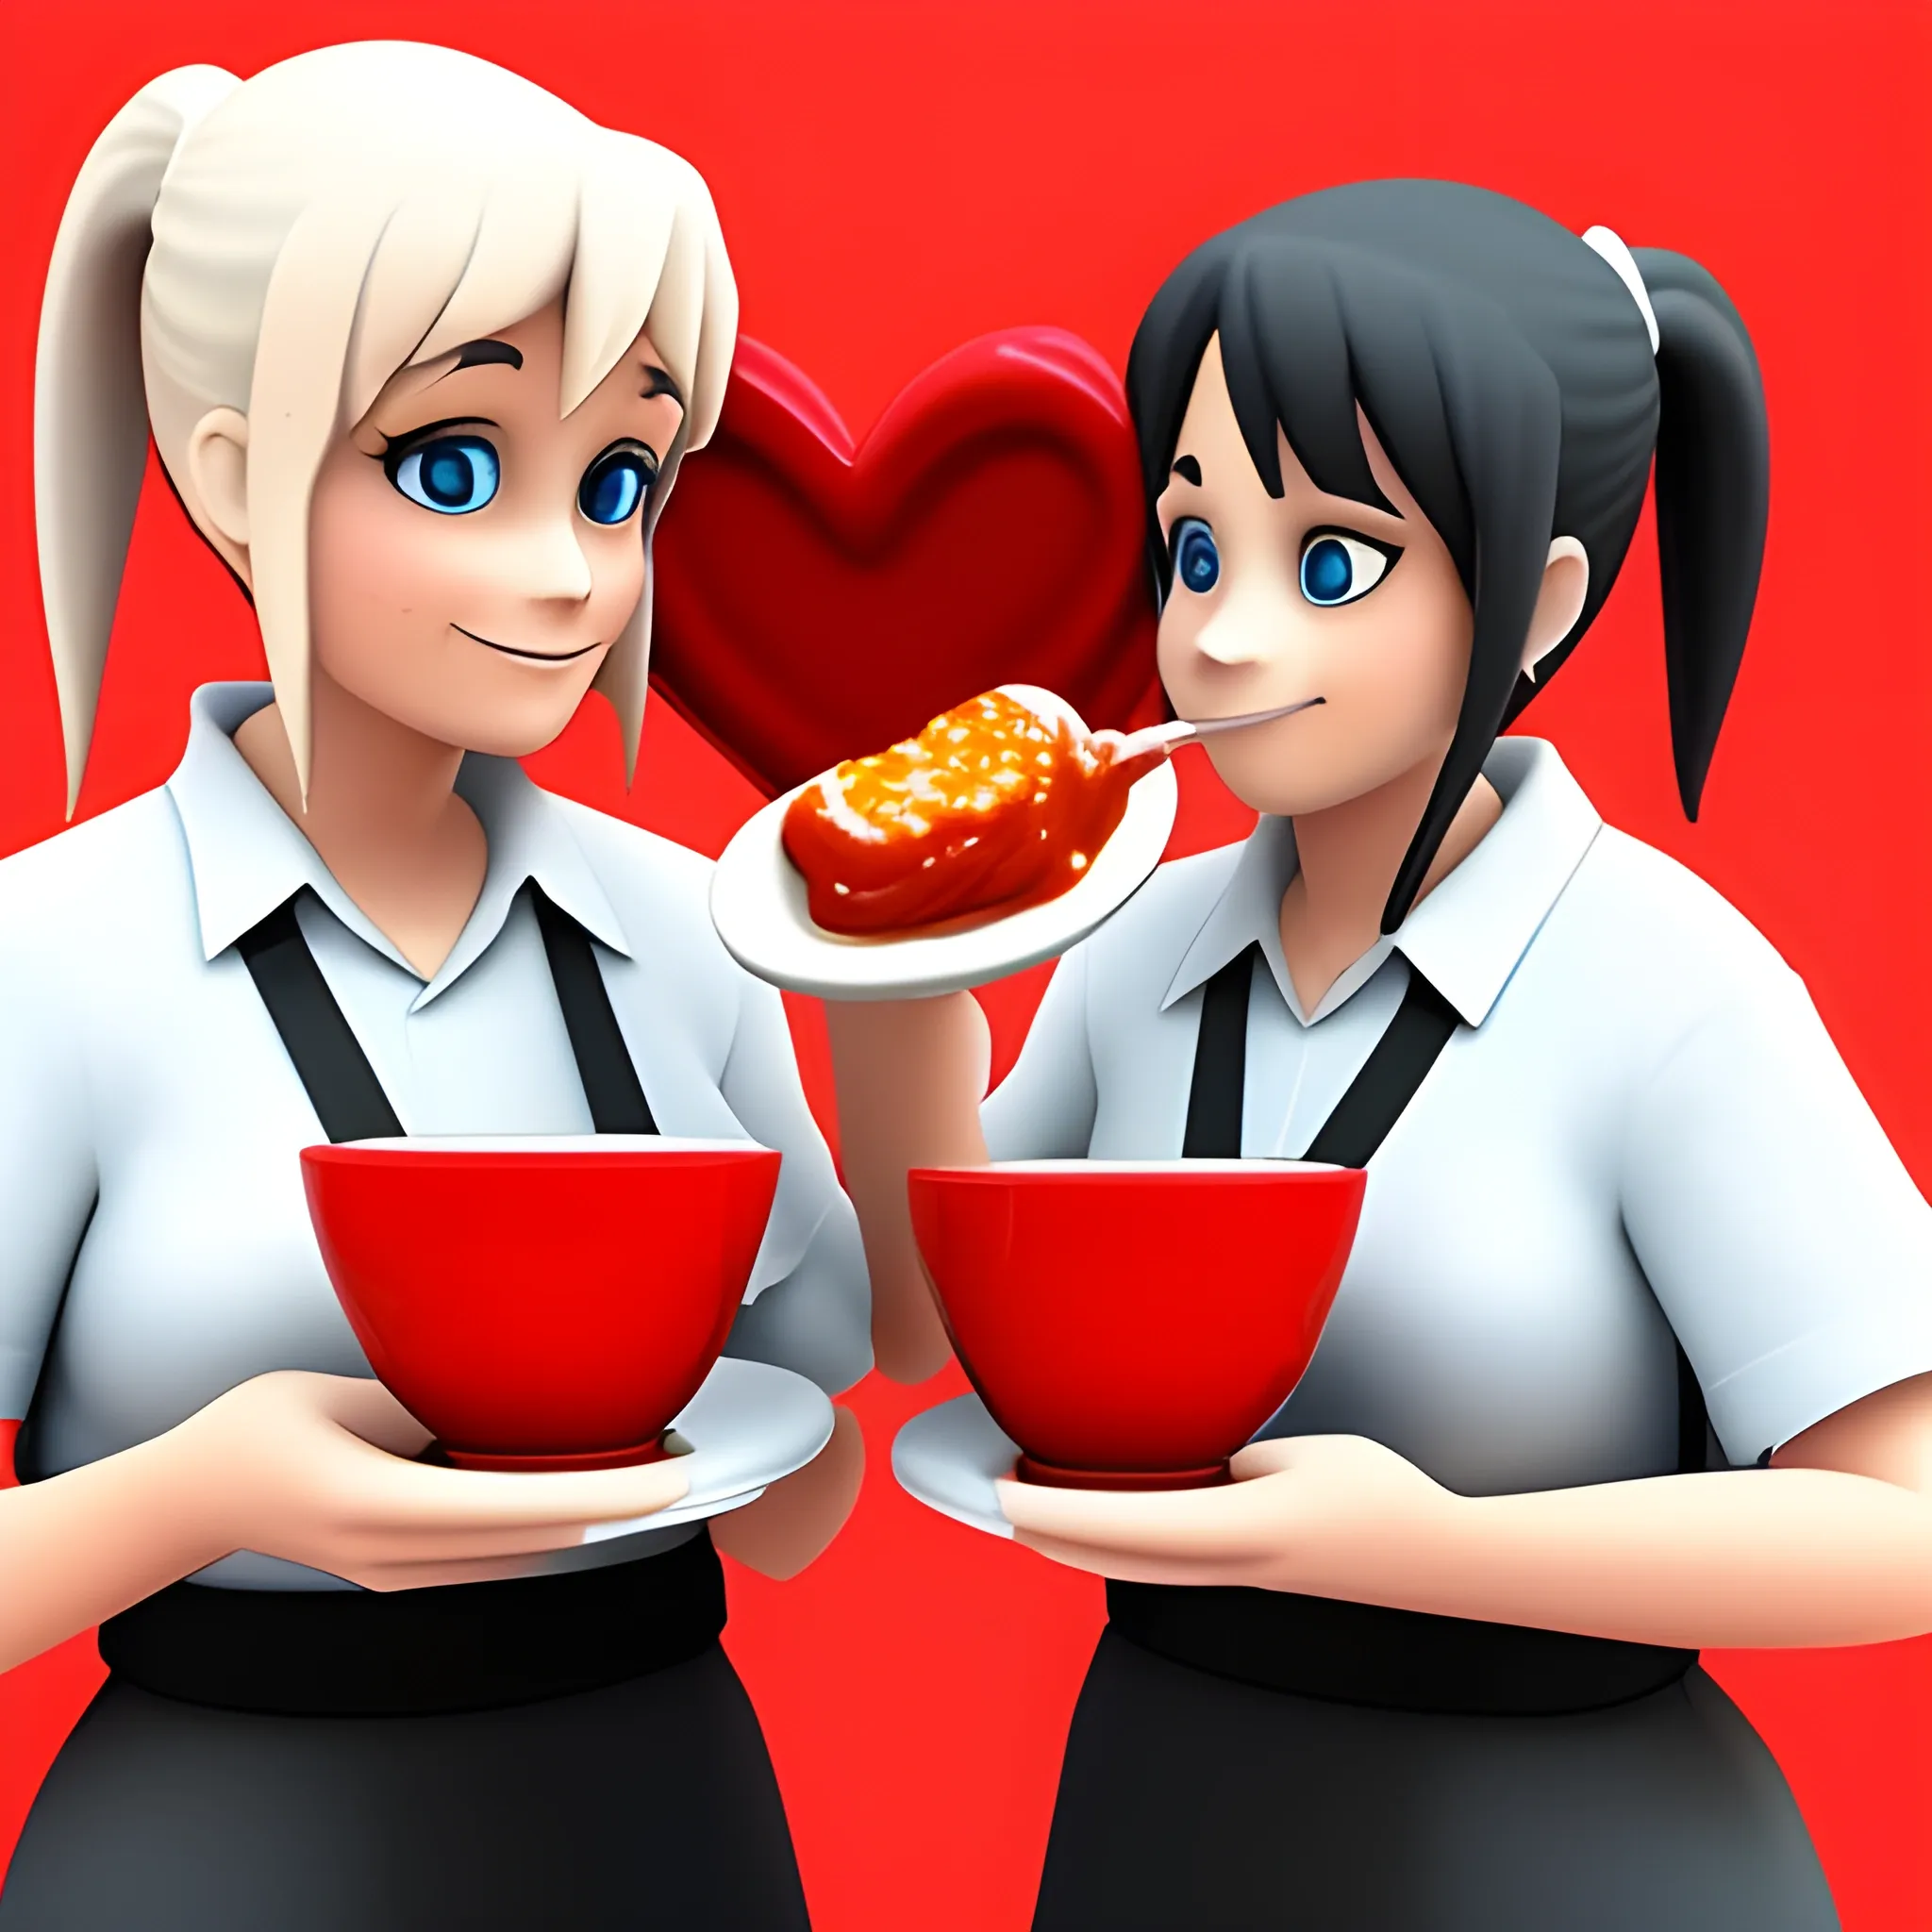 a picture of servers with your mom and ash ketchup eating soup
, 3D